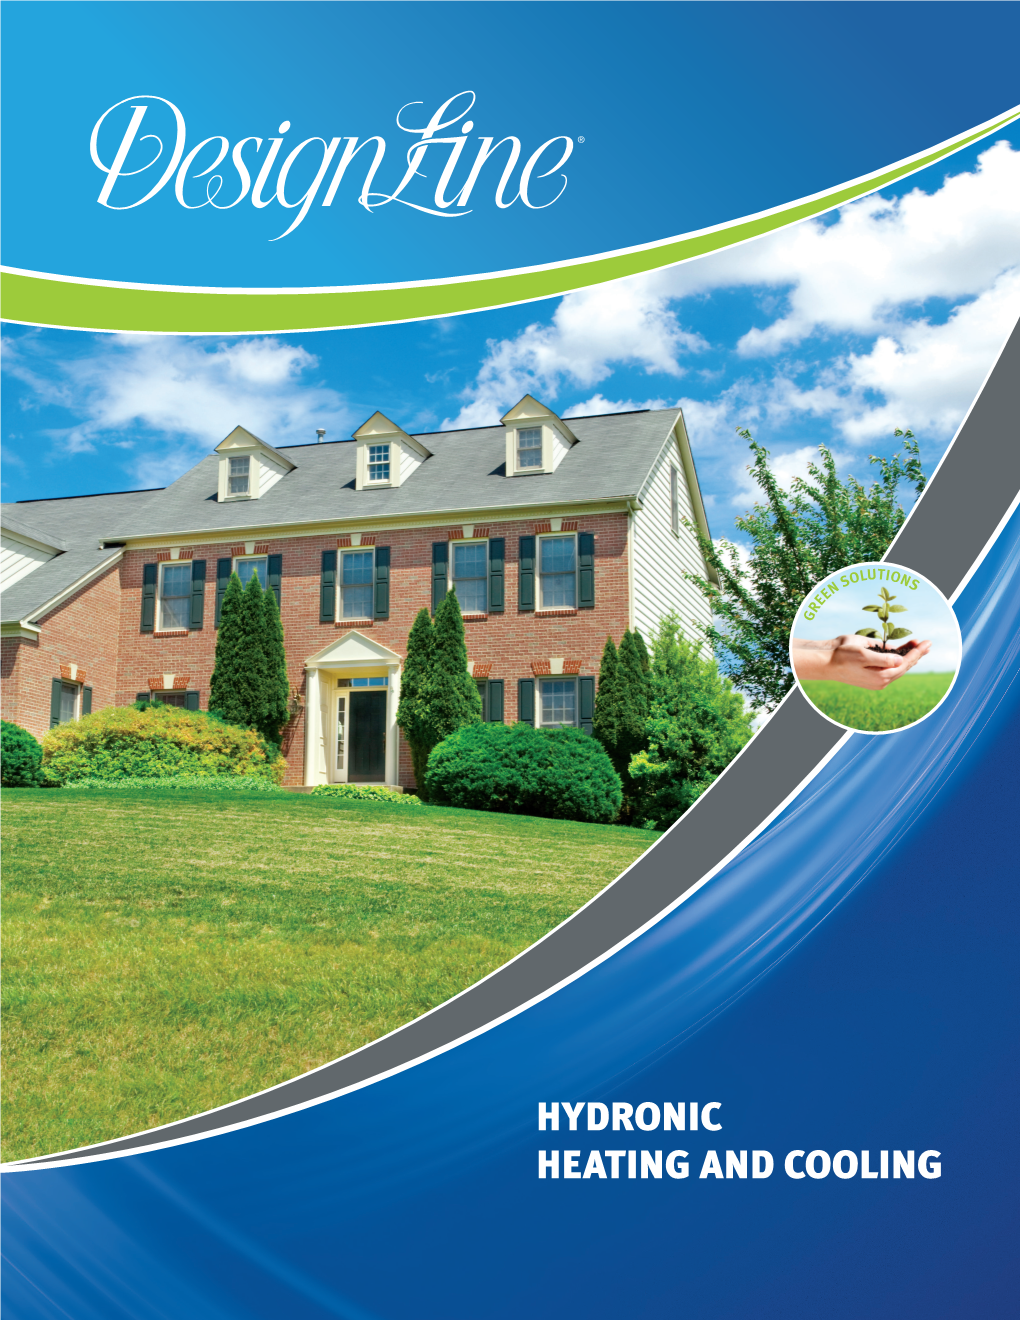 HYDRONIC HEATING and COOLING WHY HYDRONIC HEATING & COOLING? the Short Answer? TOTAL COMFORT